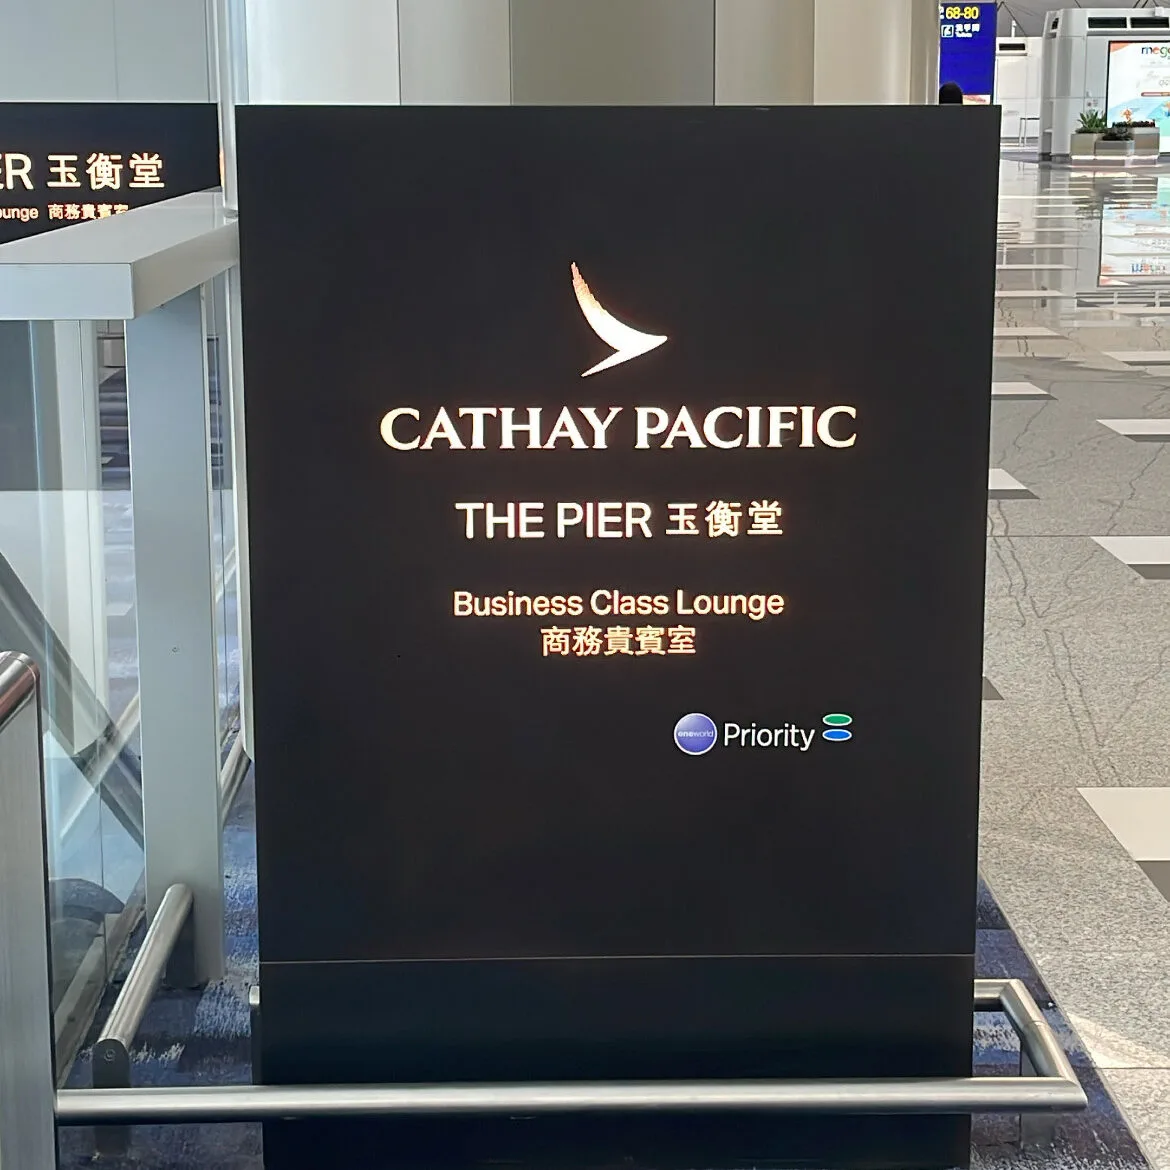 Cathay Pacific The Pier Business Class Lounge Entrance